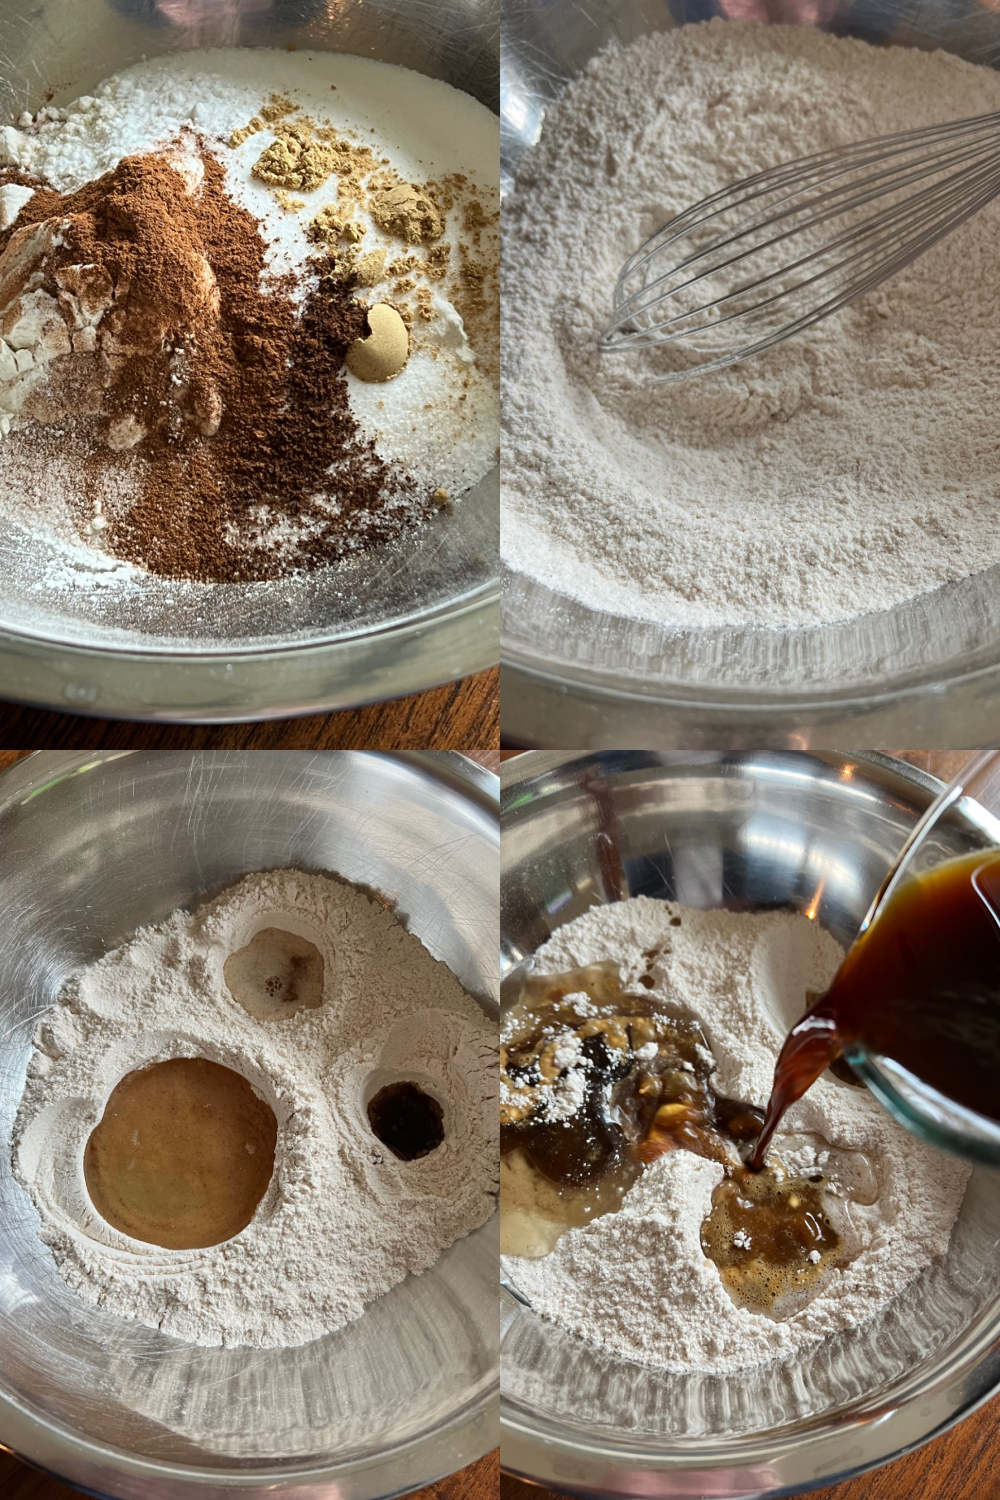 This is a four photo collage showing pictures making the crazy cake in a large silver mixing bowl. 